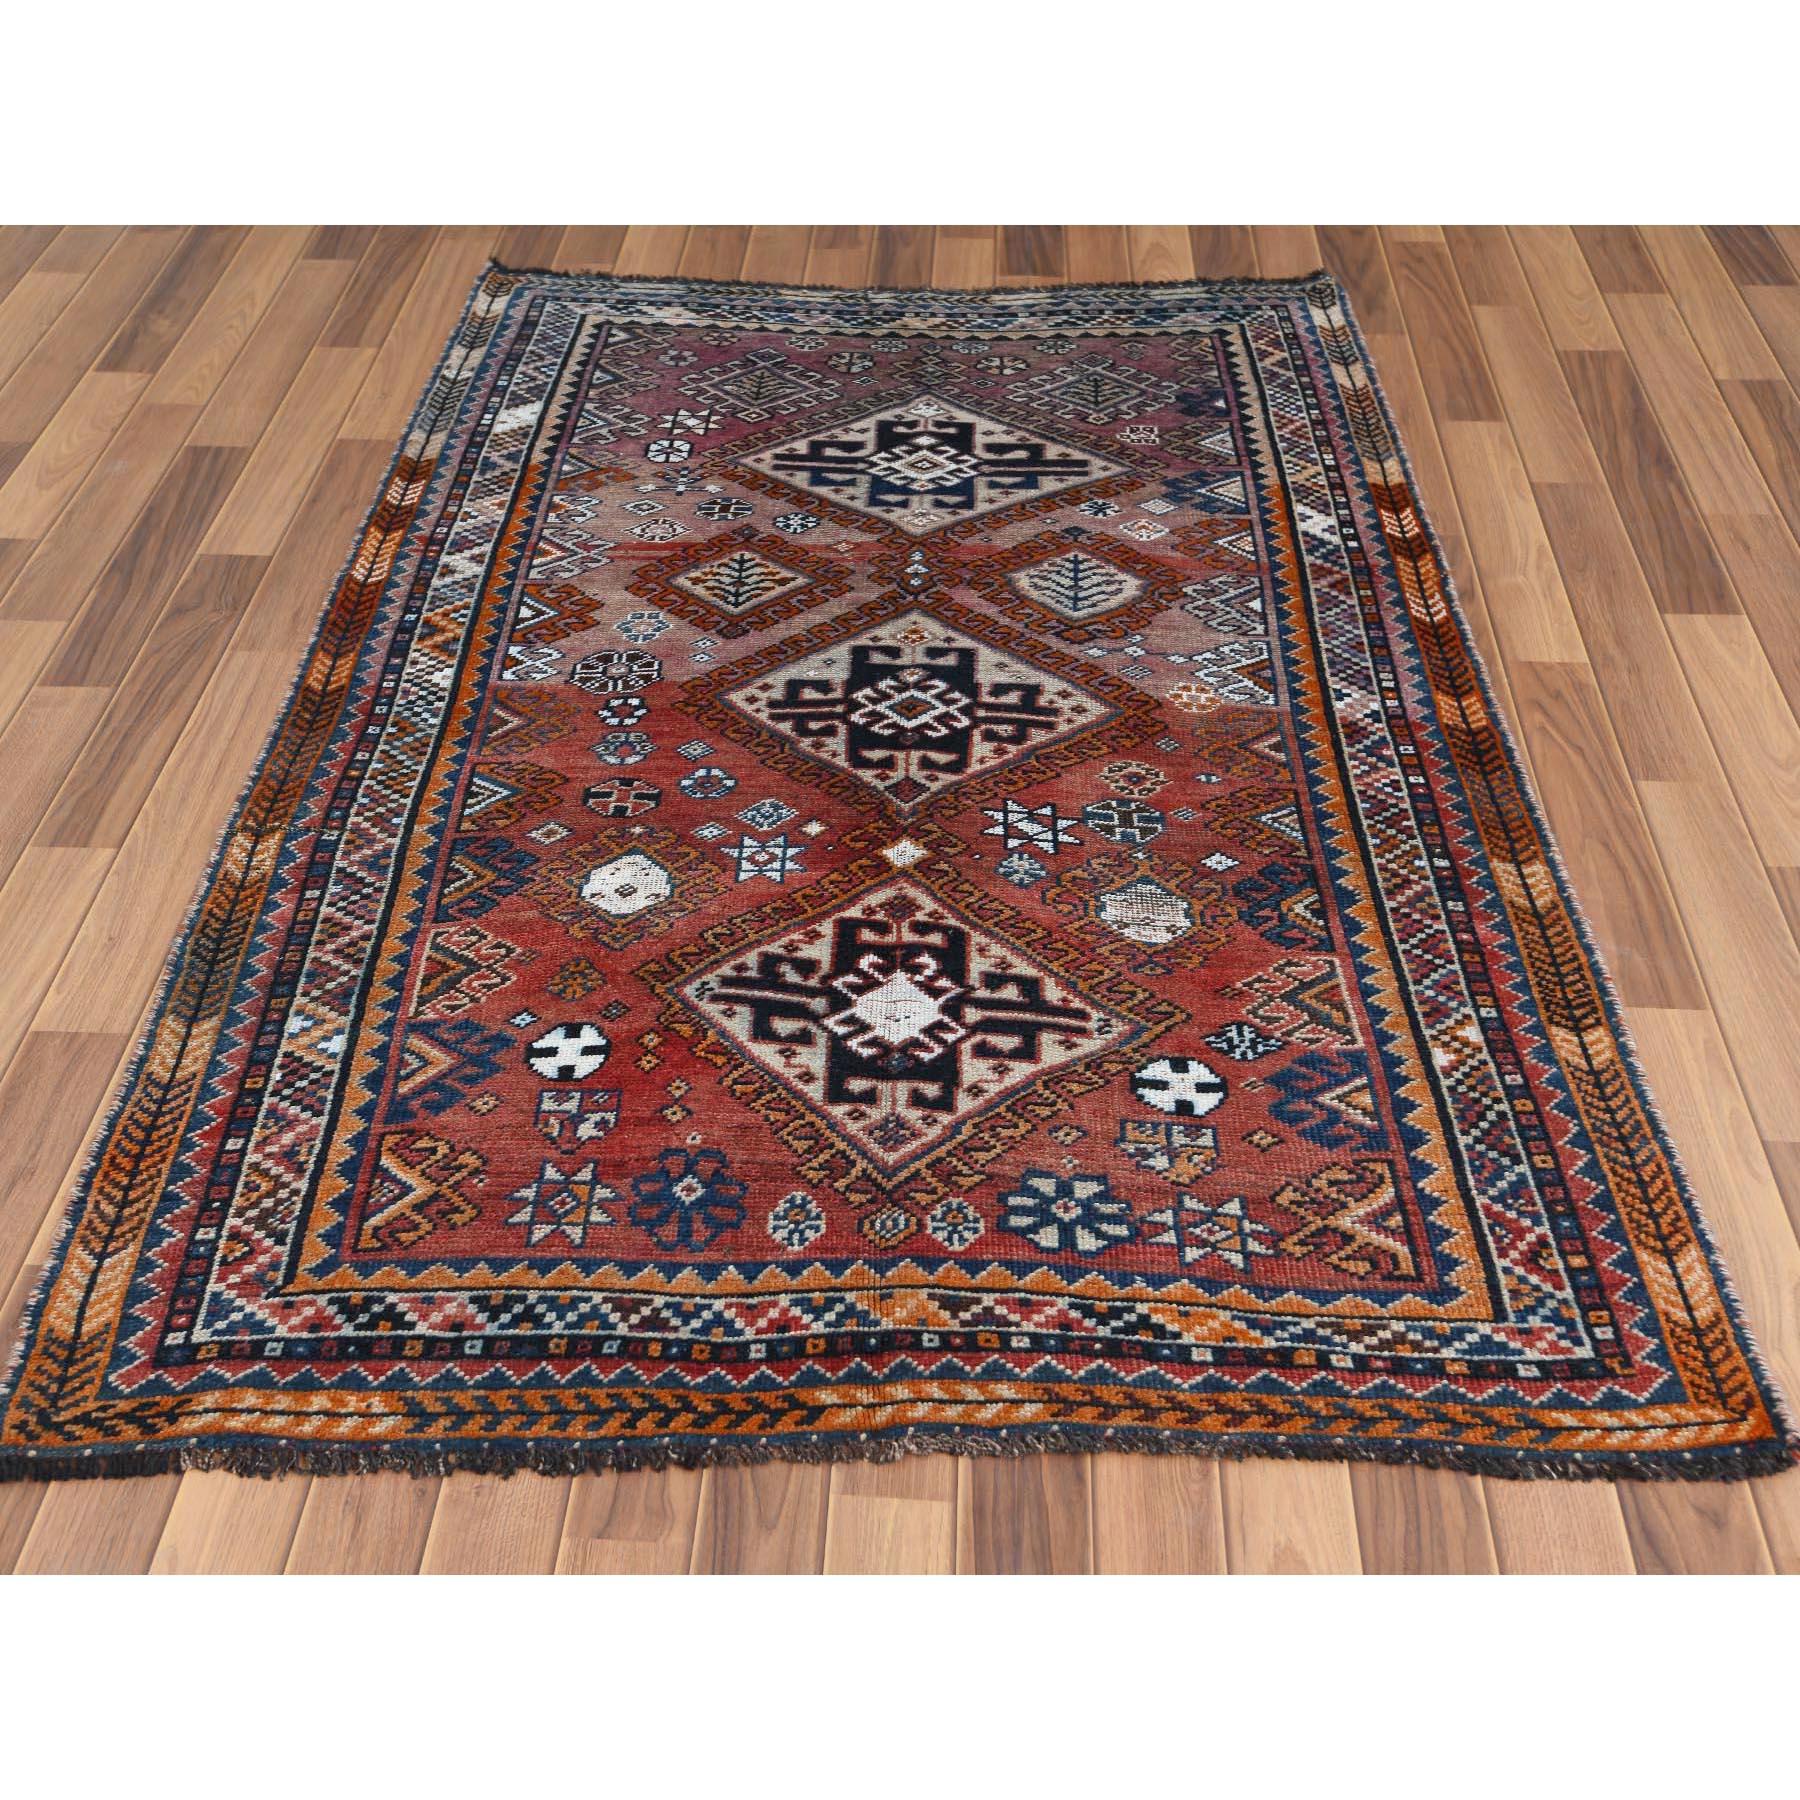 This fabulous hand knotted carpet has been created and designed for extra strength and durability. This rug has been handcrafted for weeks in the traditional method that is used to make rugs. This is truly a one of a kind piece. 

Exact rug size in